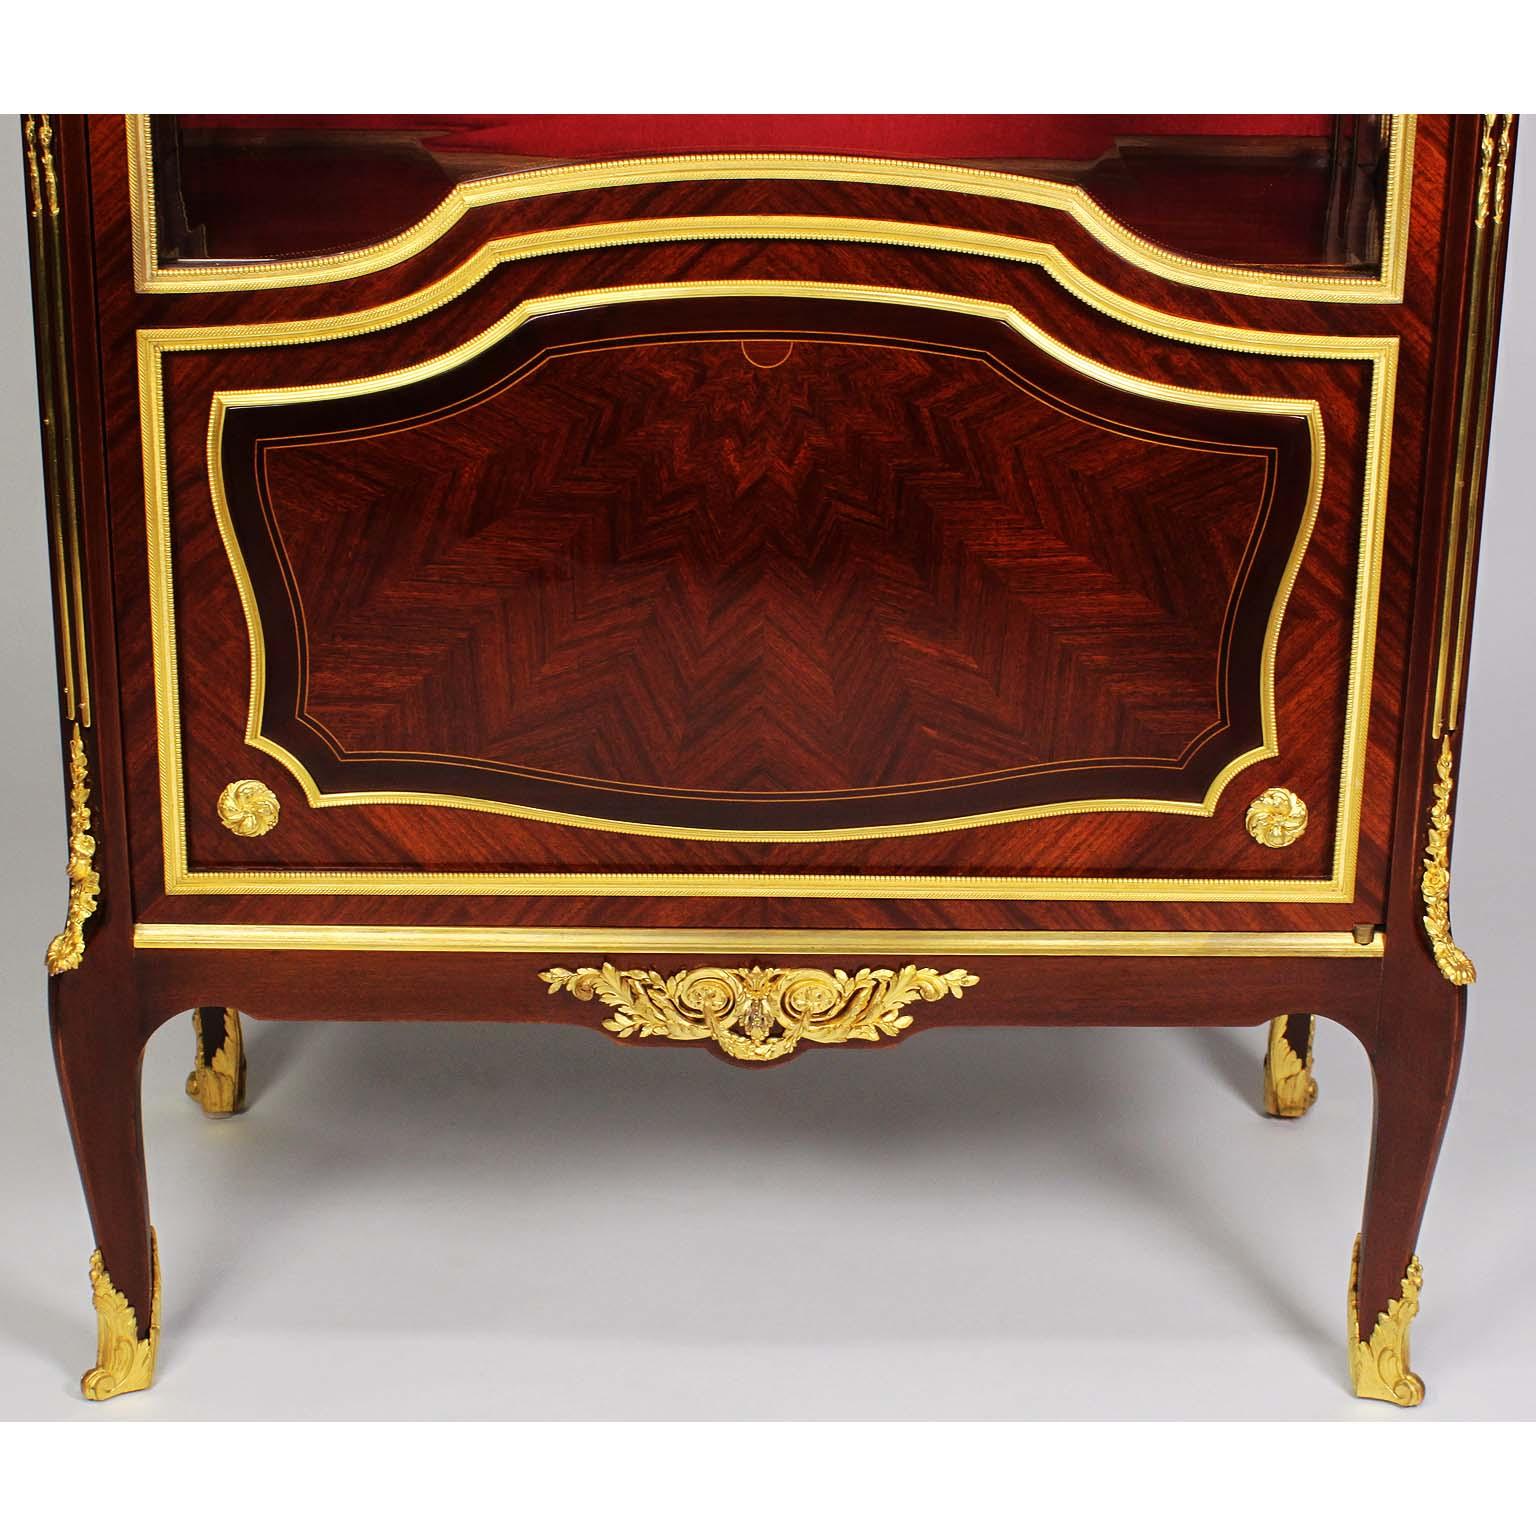 French Louis XV Style Belle Époque Mahogany & Ormolu-Mounted Vitrine Attr. Linke For Sale 7